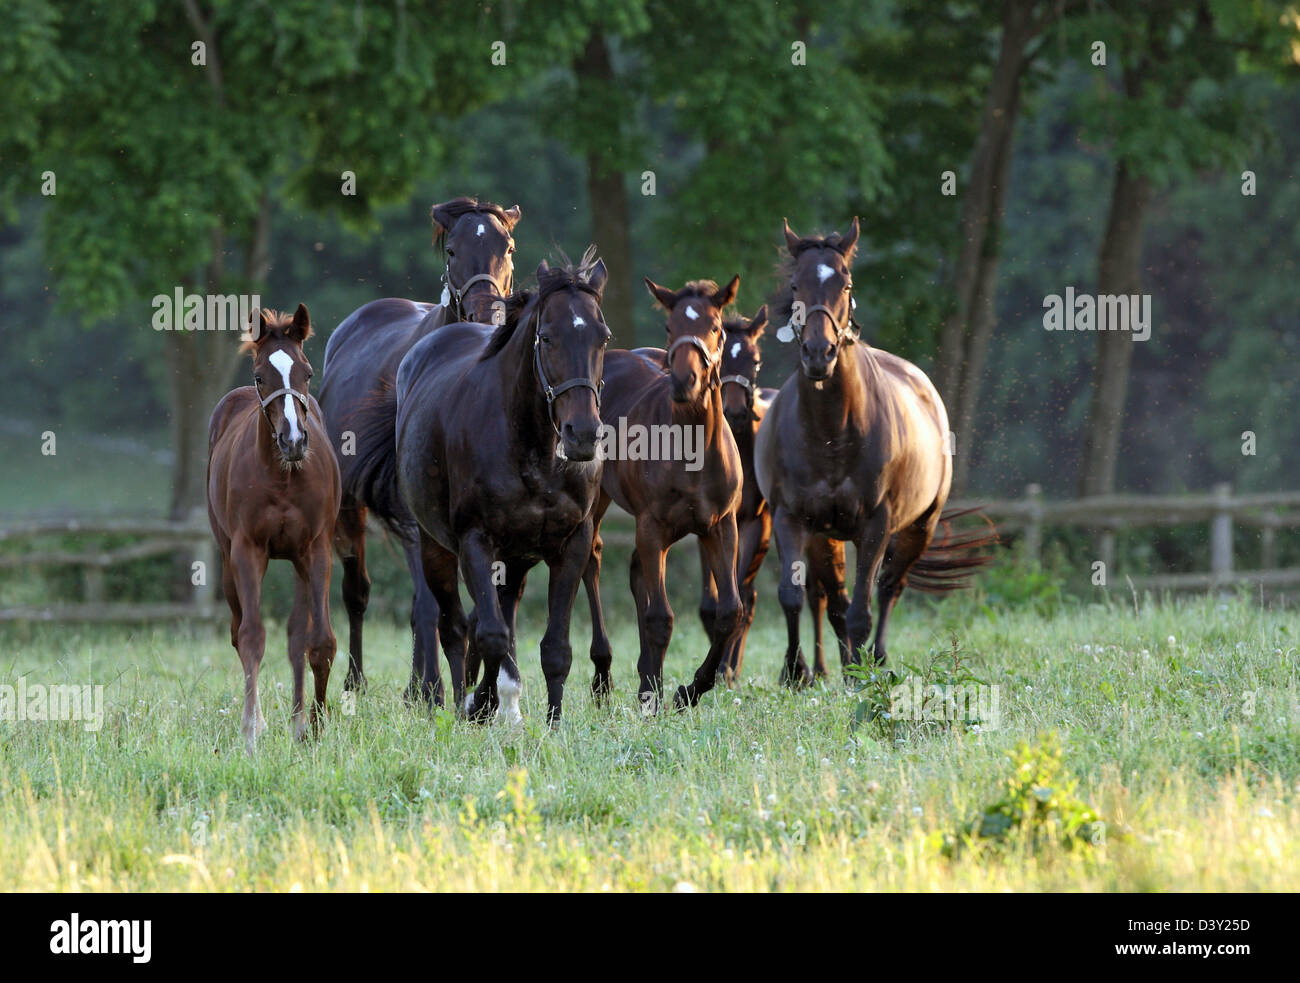 Görlsdorf, Germany, mares and foals gallop on pasture Stock Photo